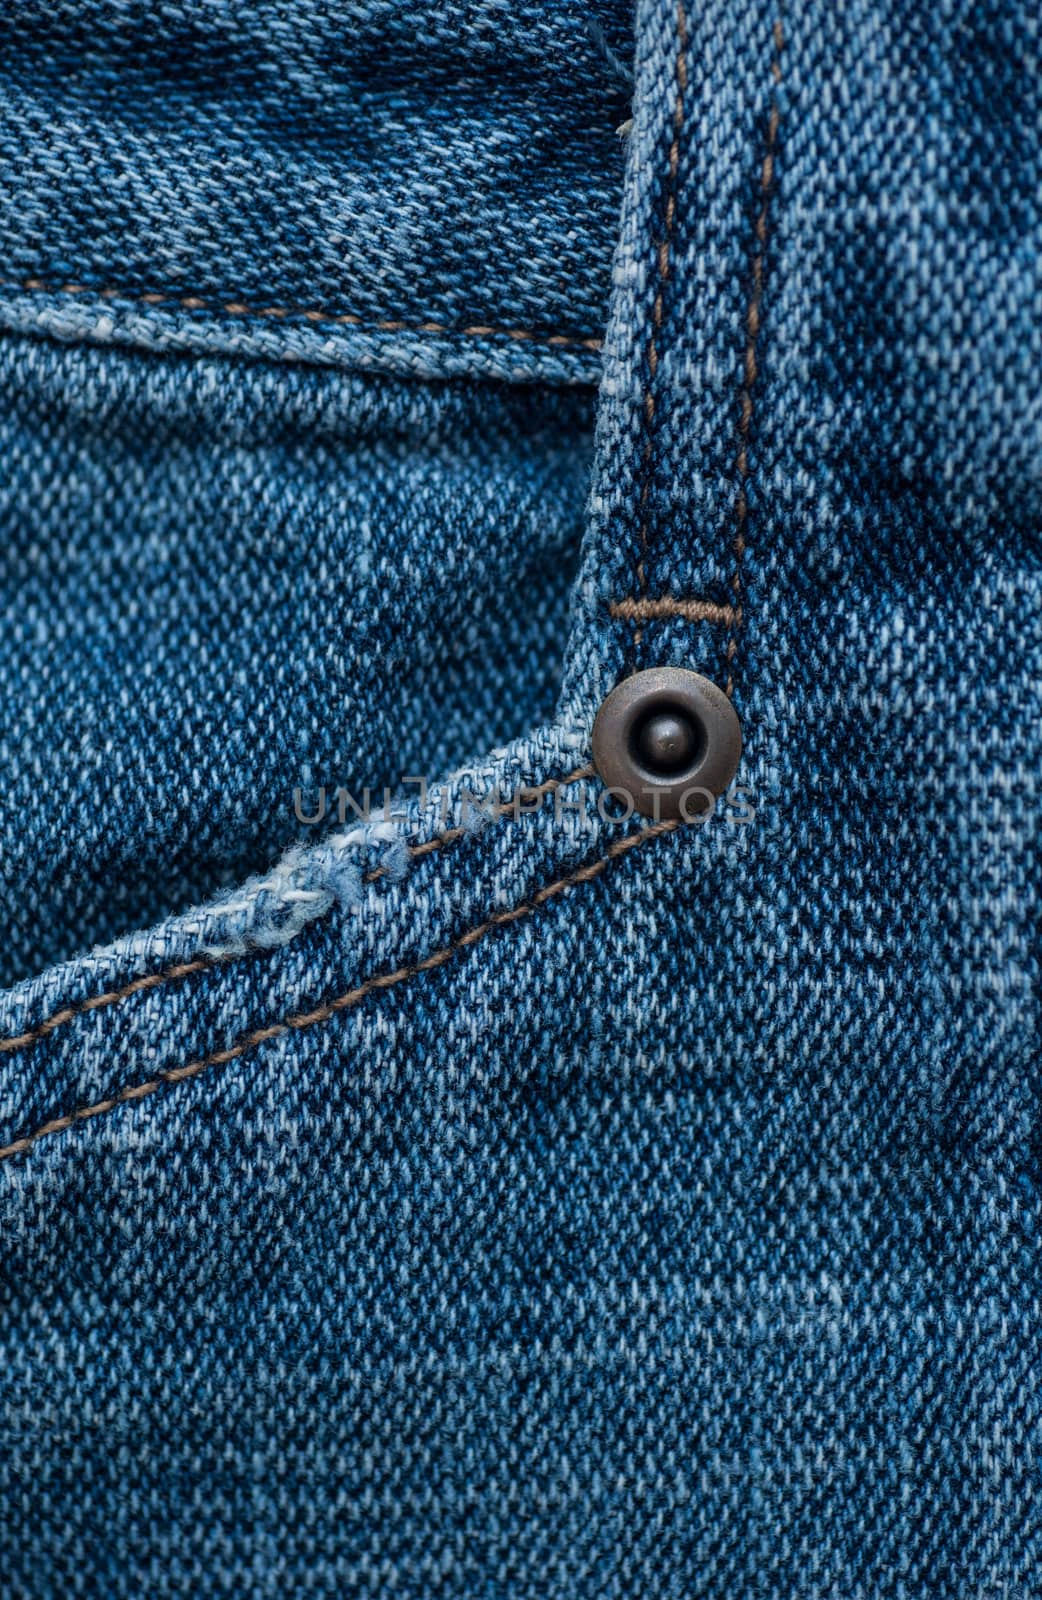 denim texture with rivets for background and place for text.